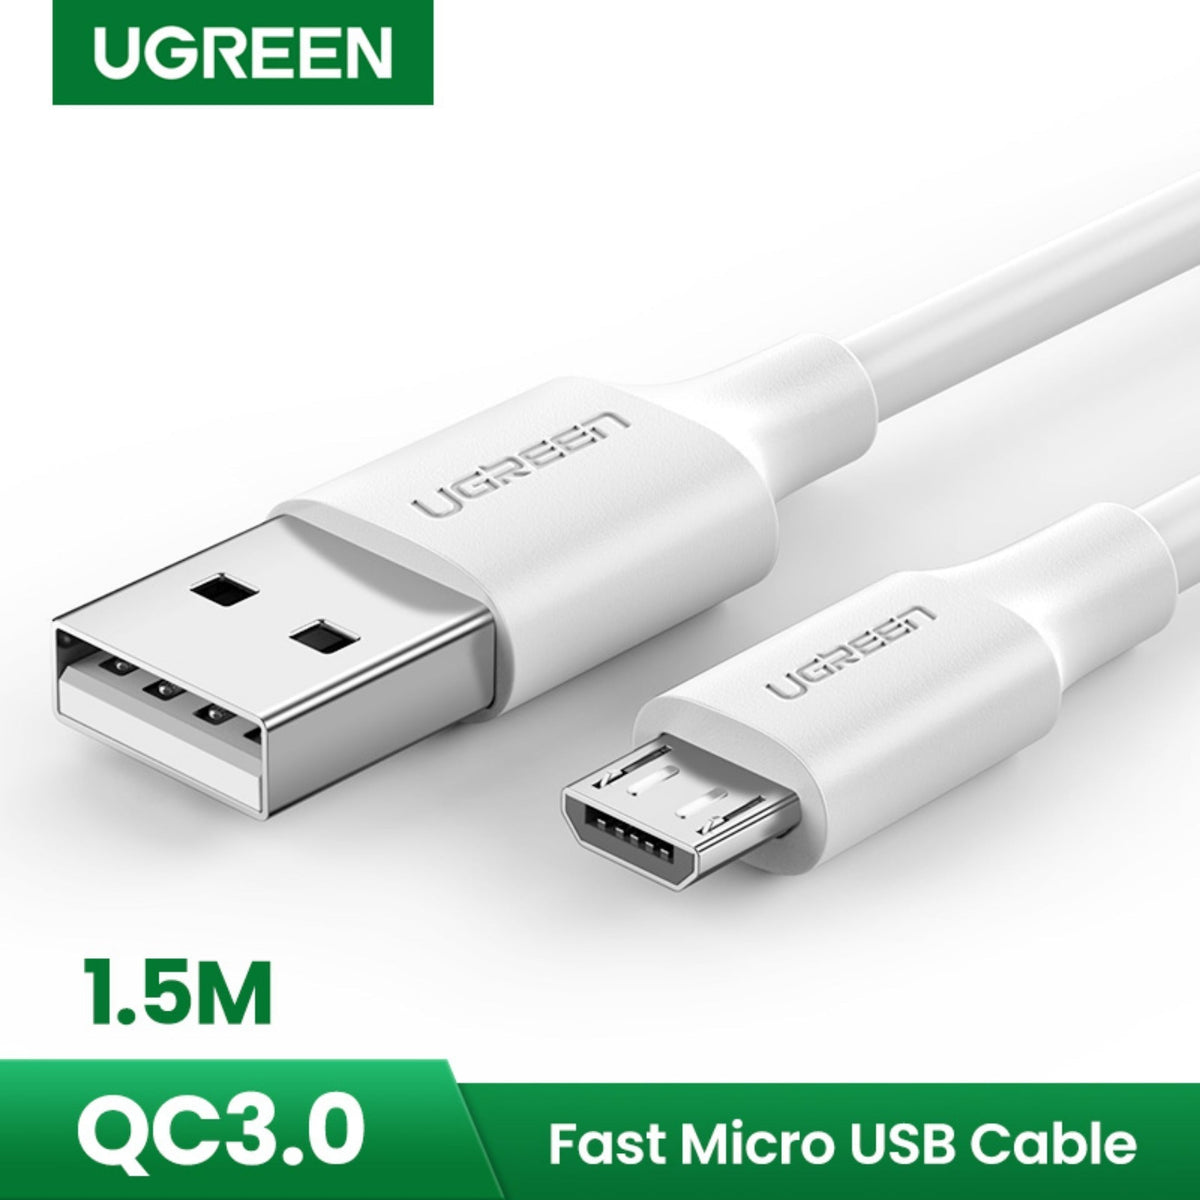 Ugreen US289 USB 2.0A to Micro USB Cable Nickel Plating 1.5M - White